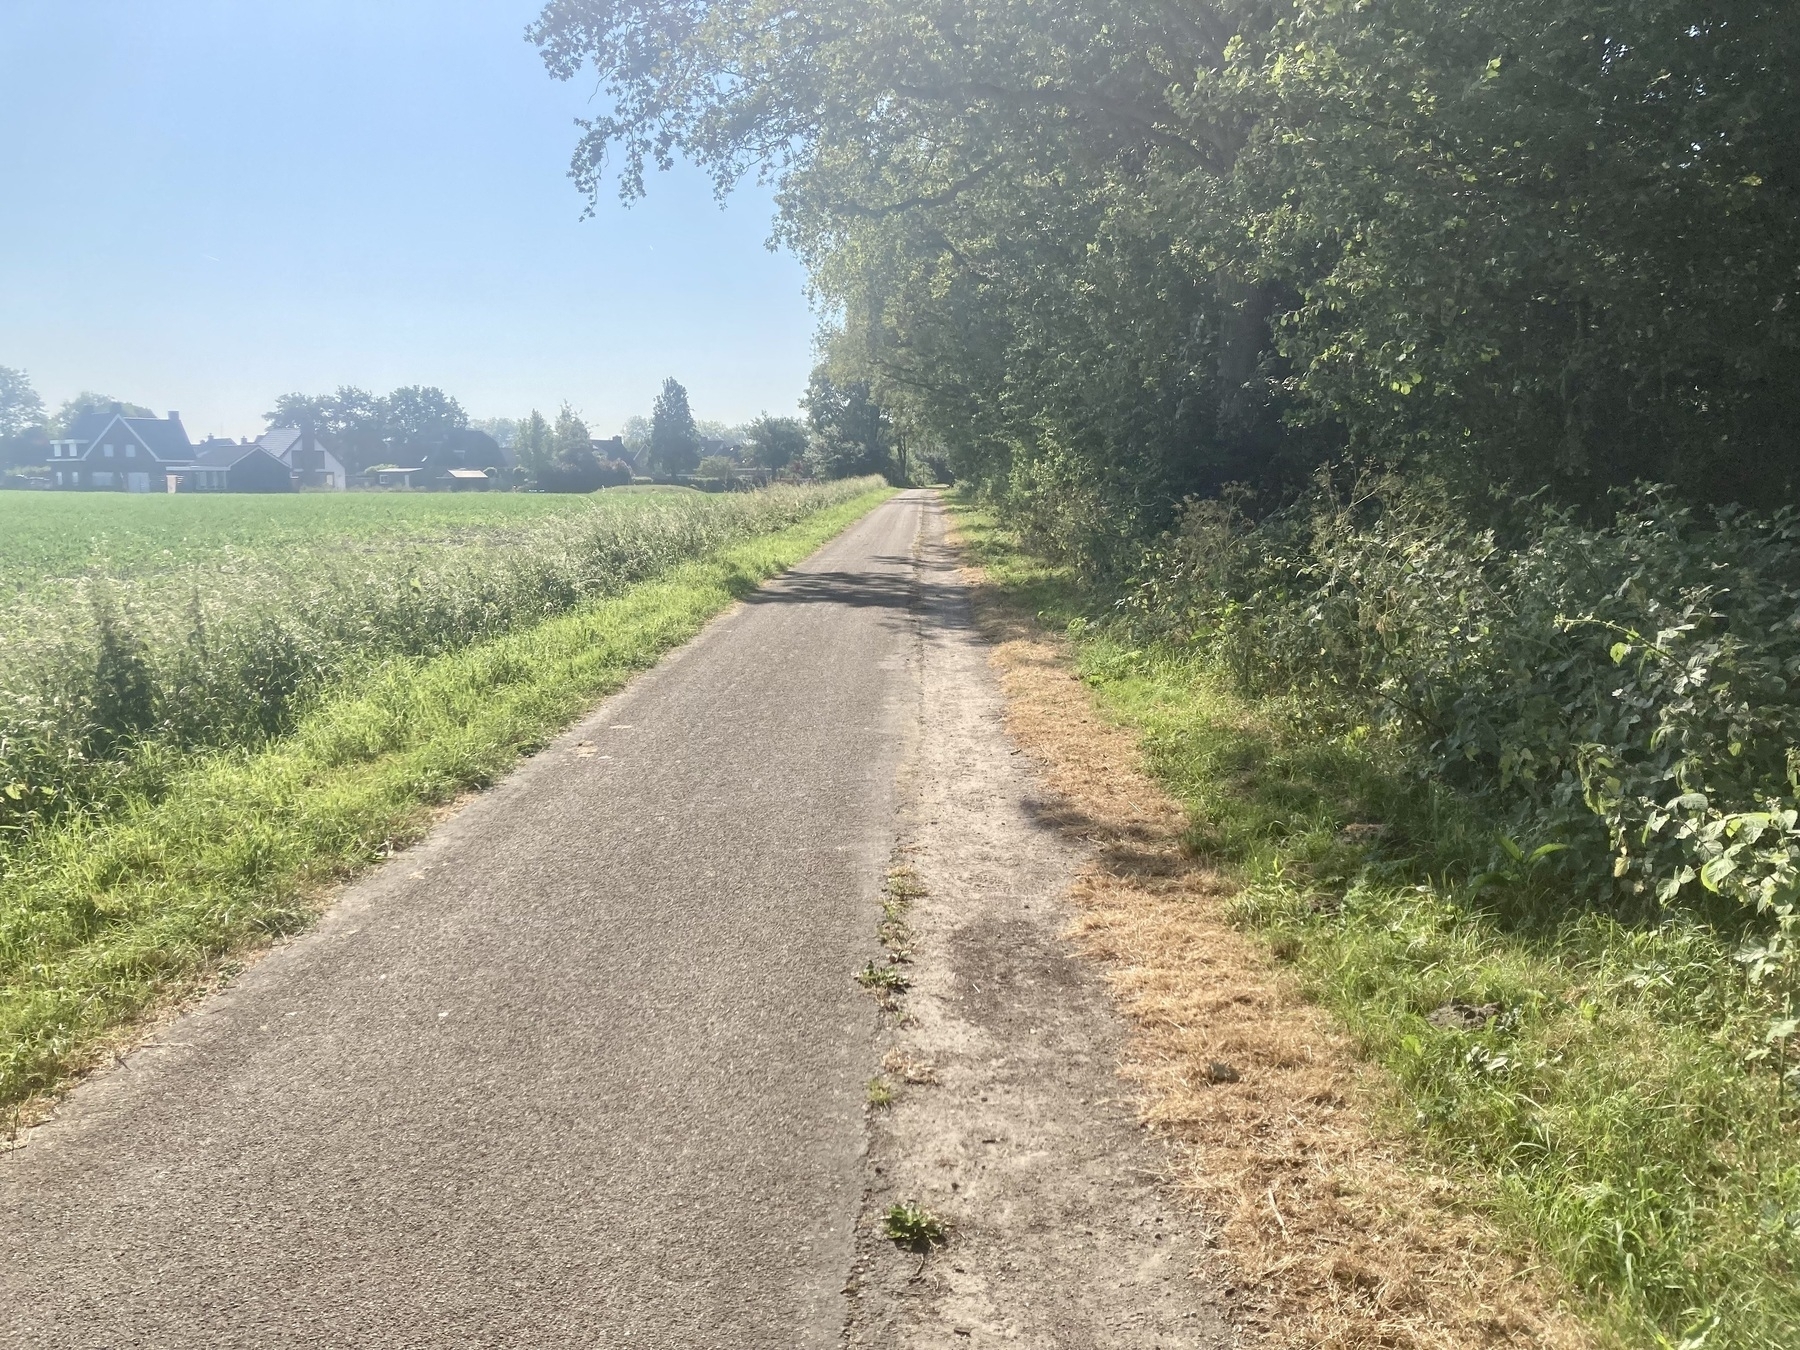 Long bike path, mostly in the sun, tough on the body